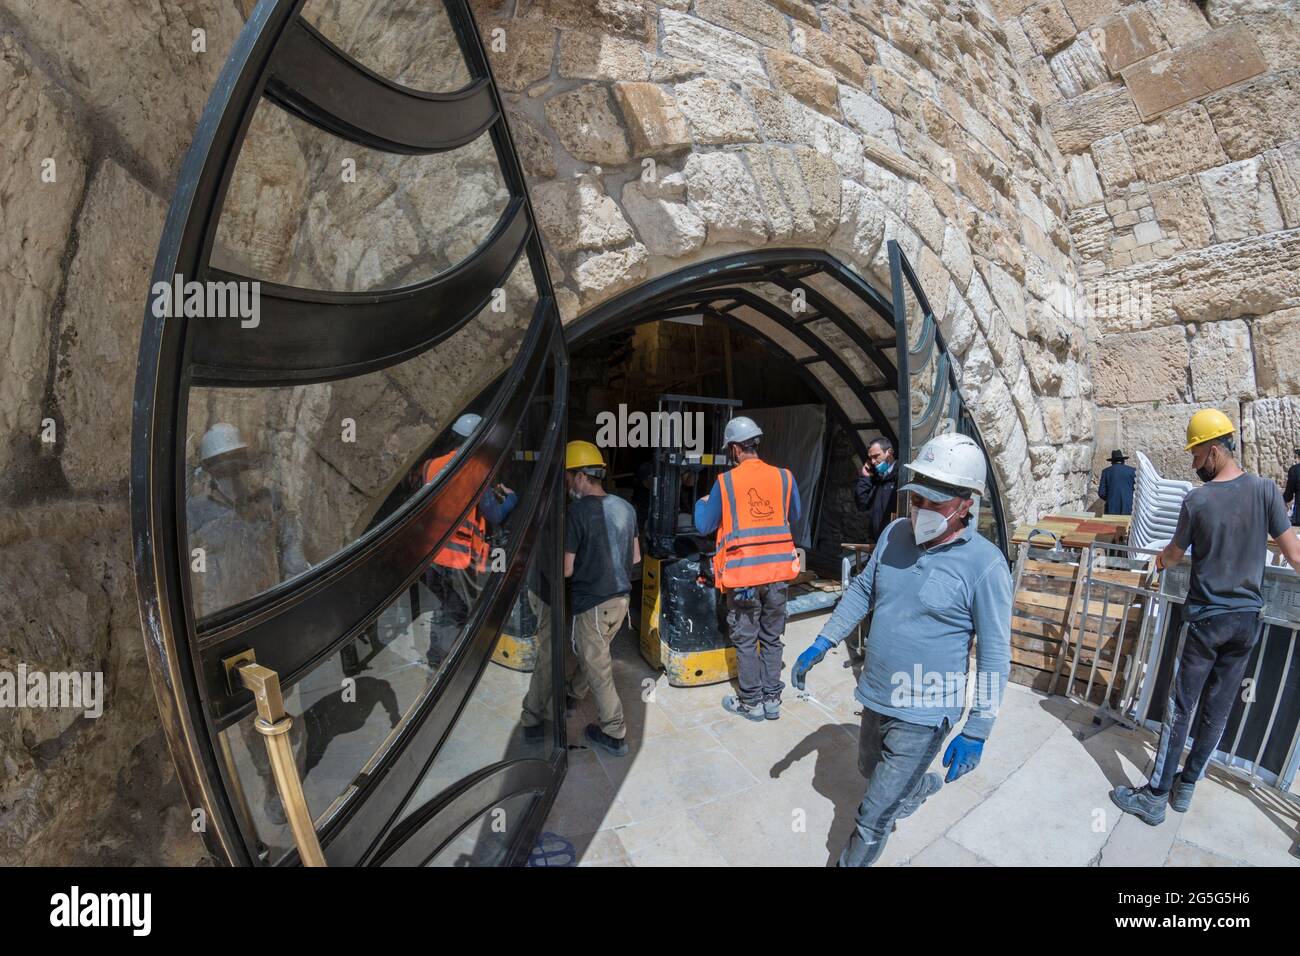 Jerusalem, Israel. construction workers work at the tunnels of the Western Wall, one of the holliest places for Judaism, also known as the 'Wailling wall', with facemasks and security equipment to keep them safe during the COVID pandemic. Stock Photo